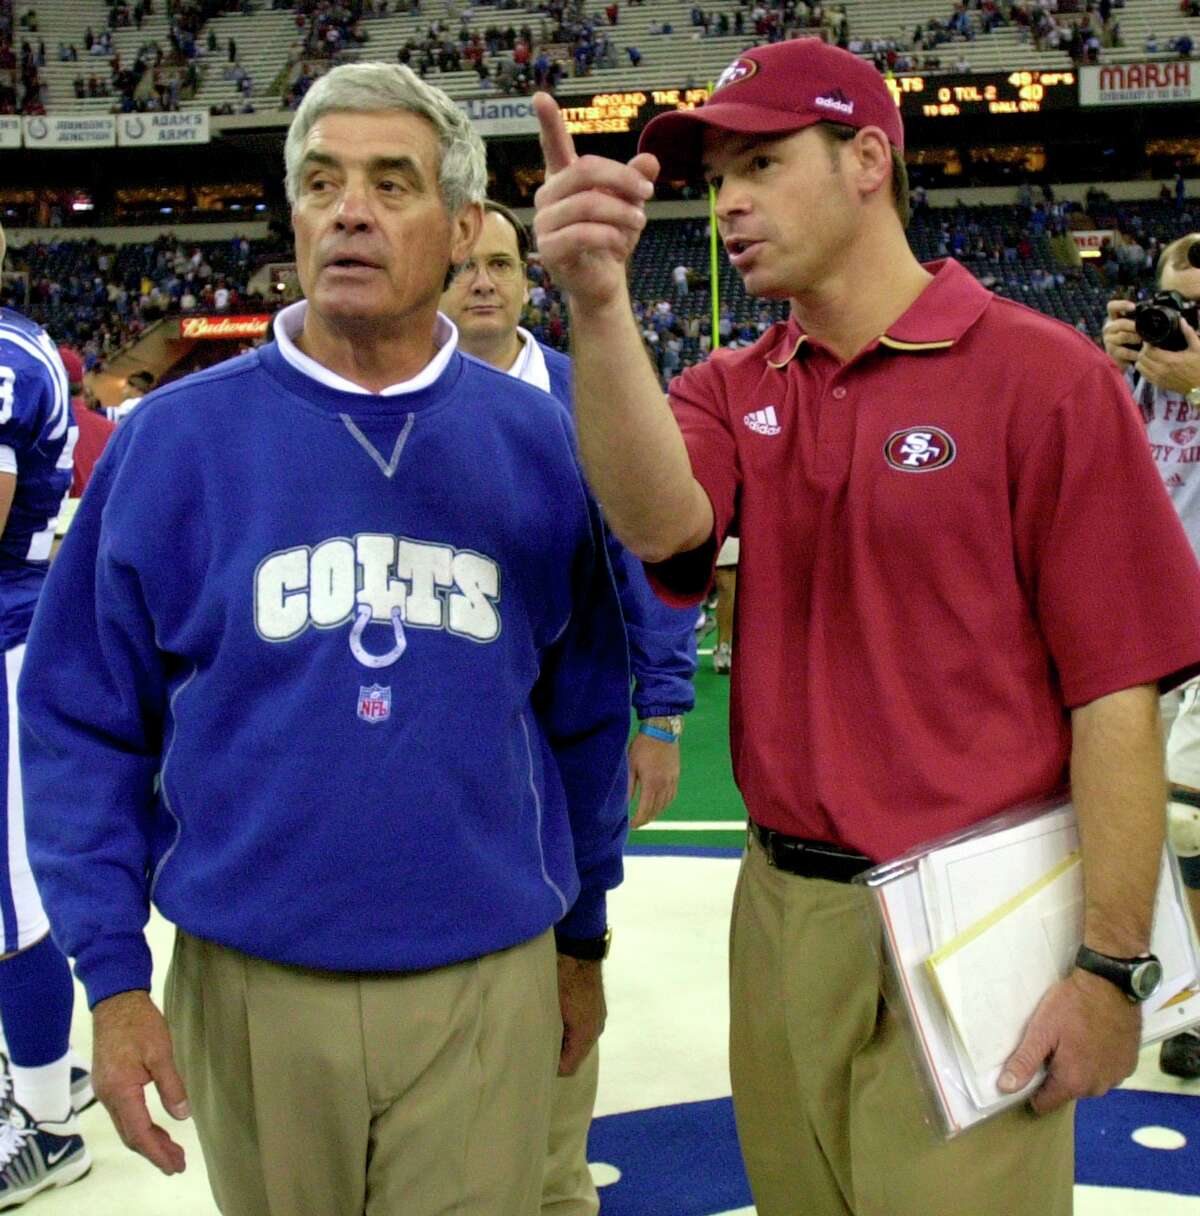 Indianapolis Colts head coach Jim Mora, left, is greeted by his son, San Francisco 49ers defensive coordinator Jim Mora, Jr. following a game in 2001.